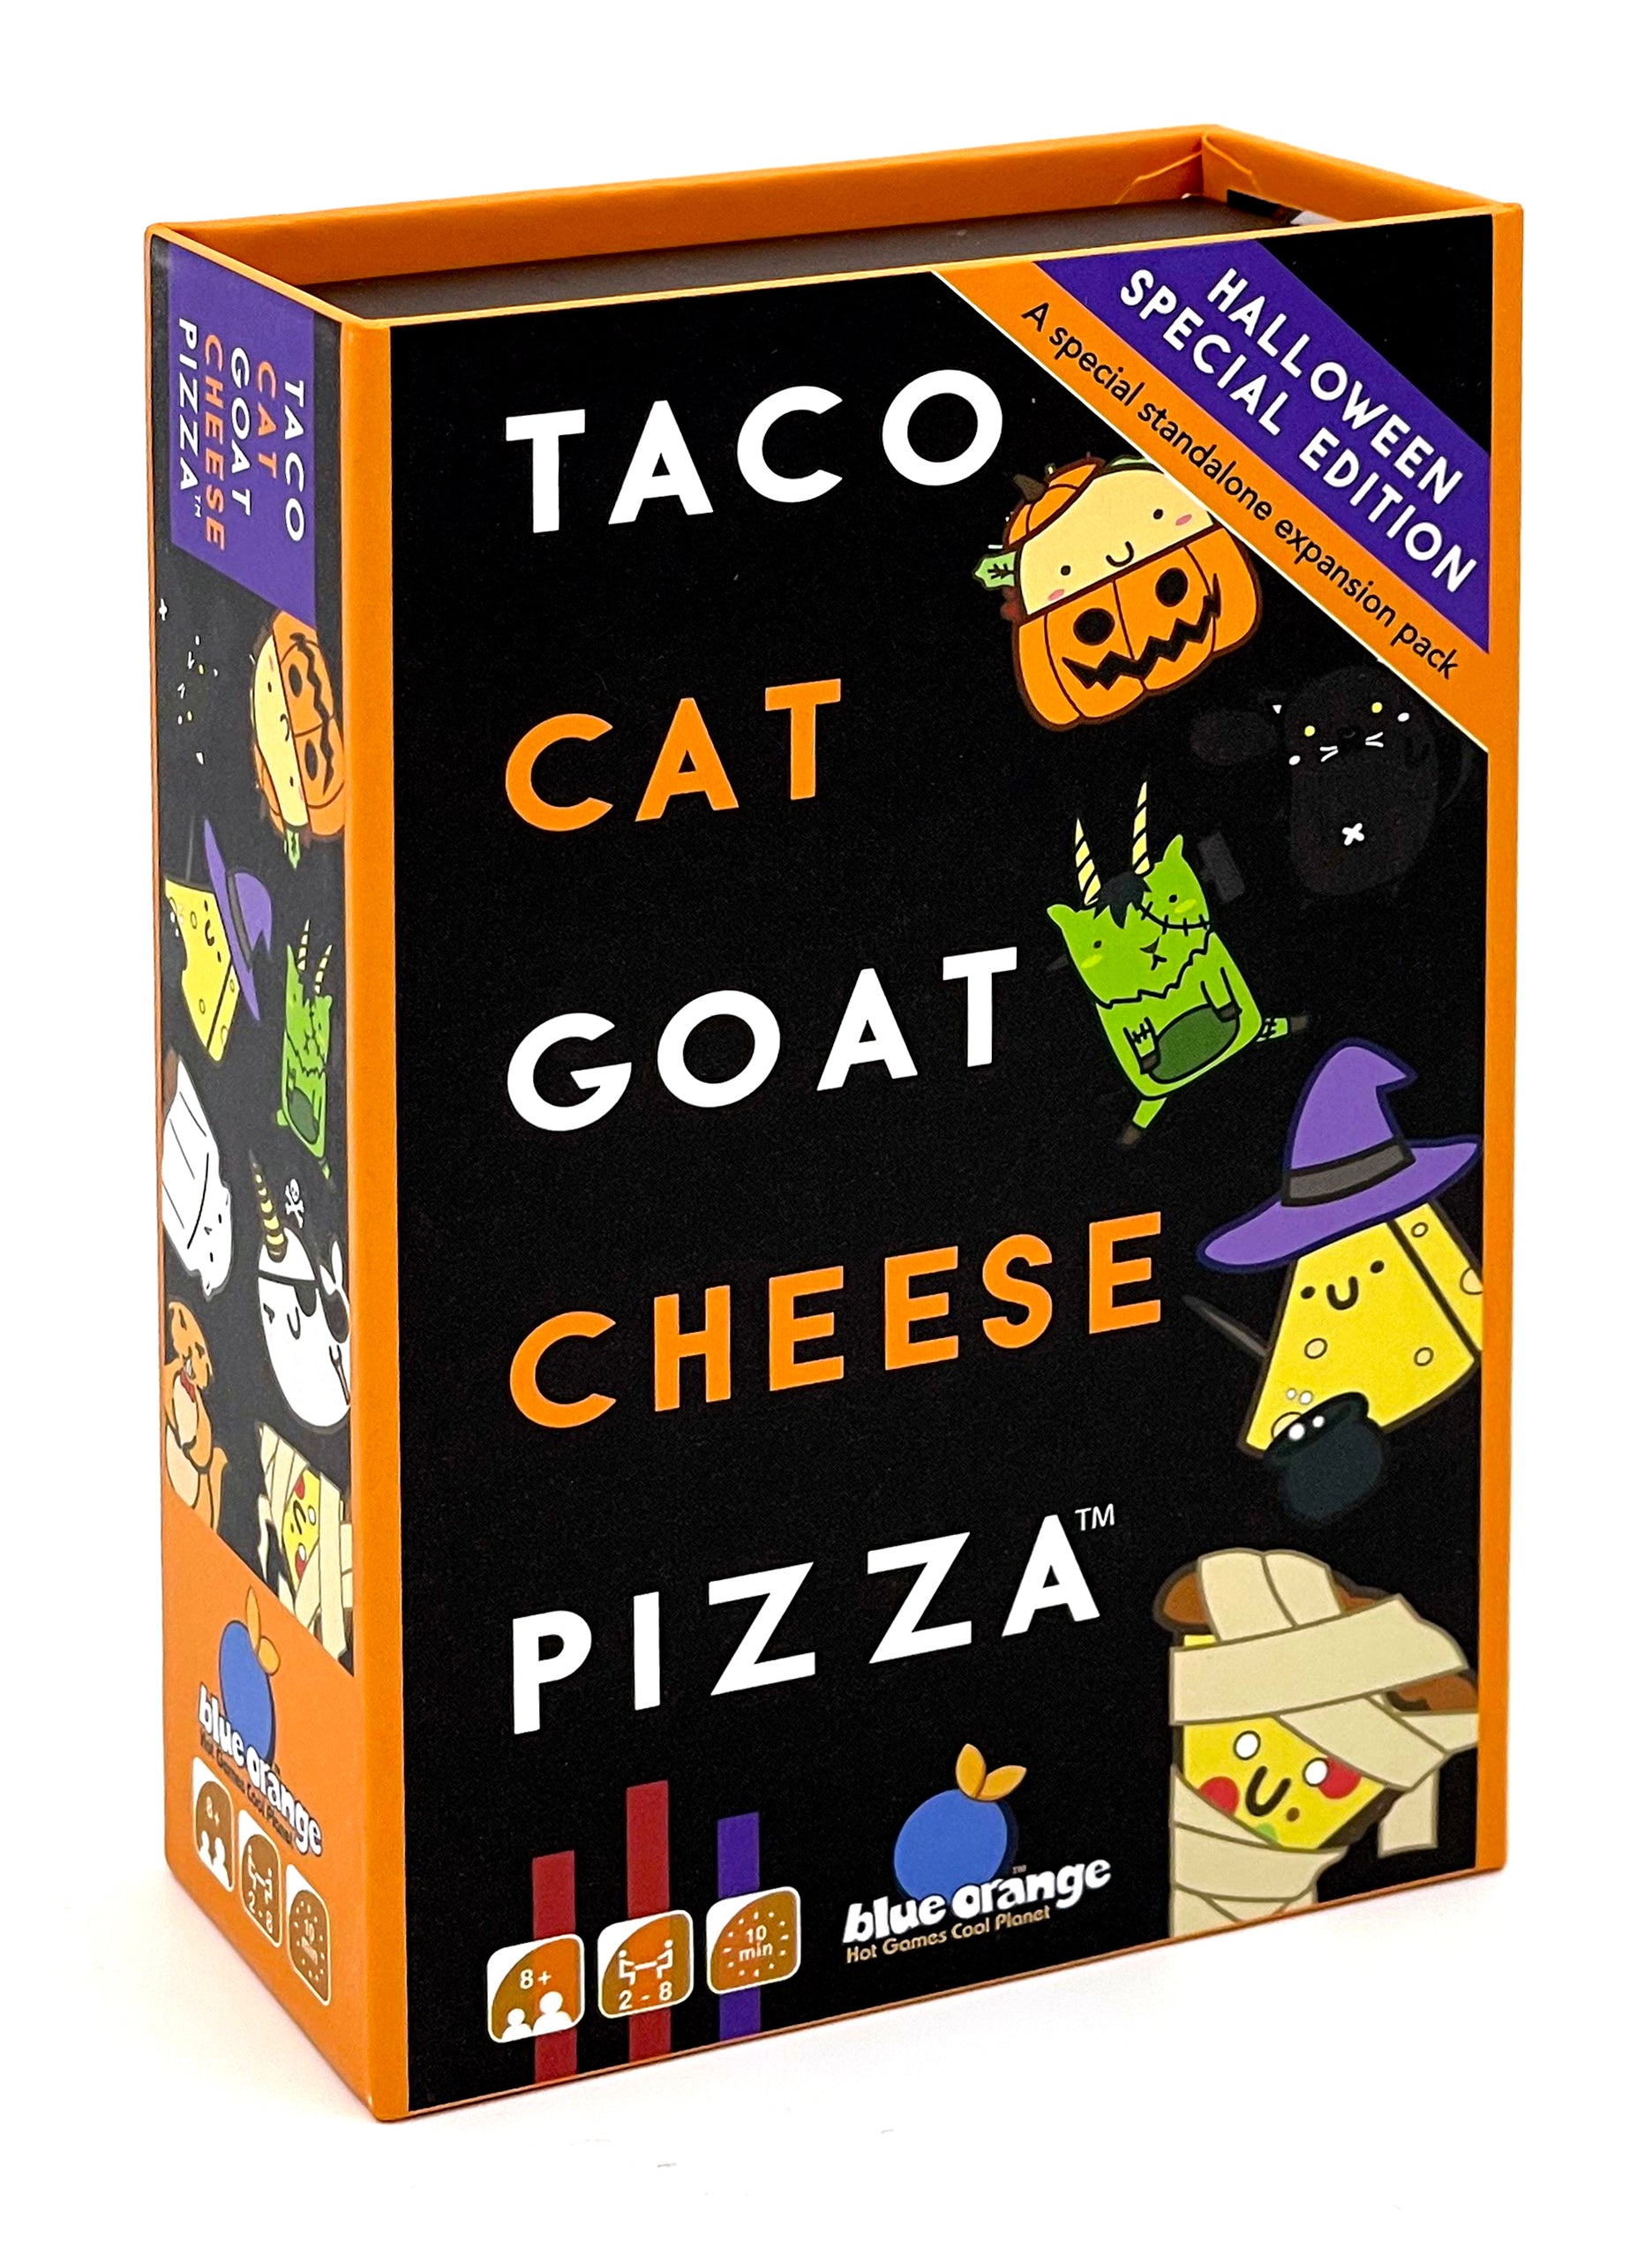 SPOOKY Edition - Taco Cat Goat Cheese Pizza